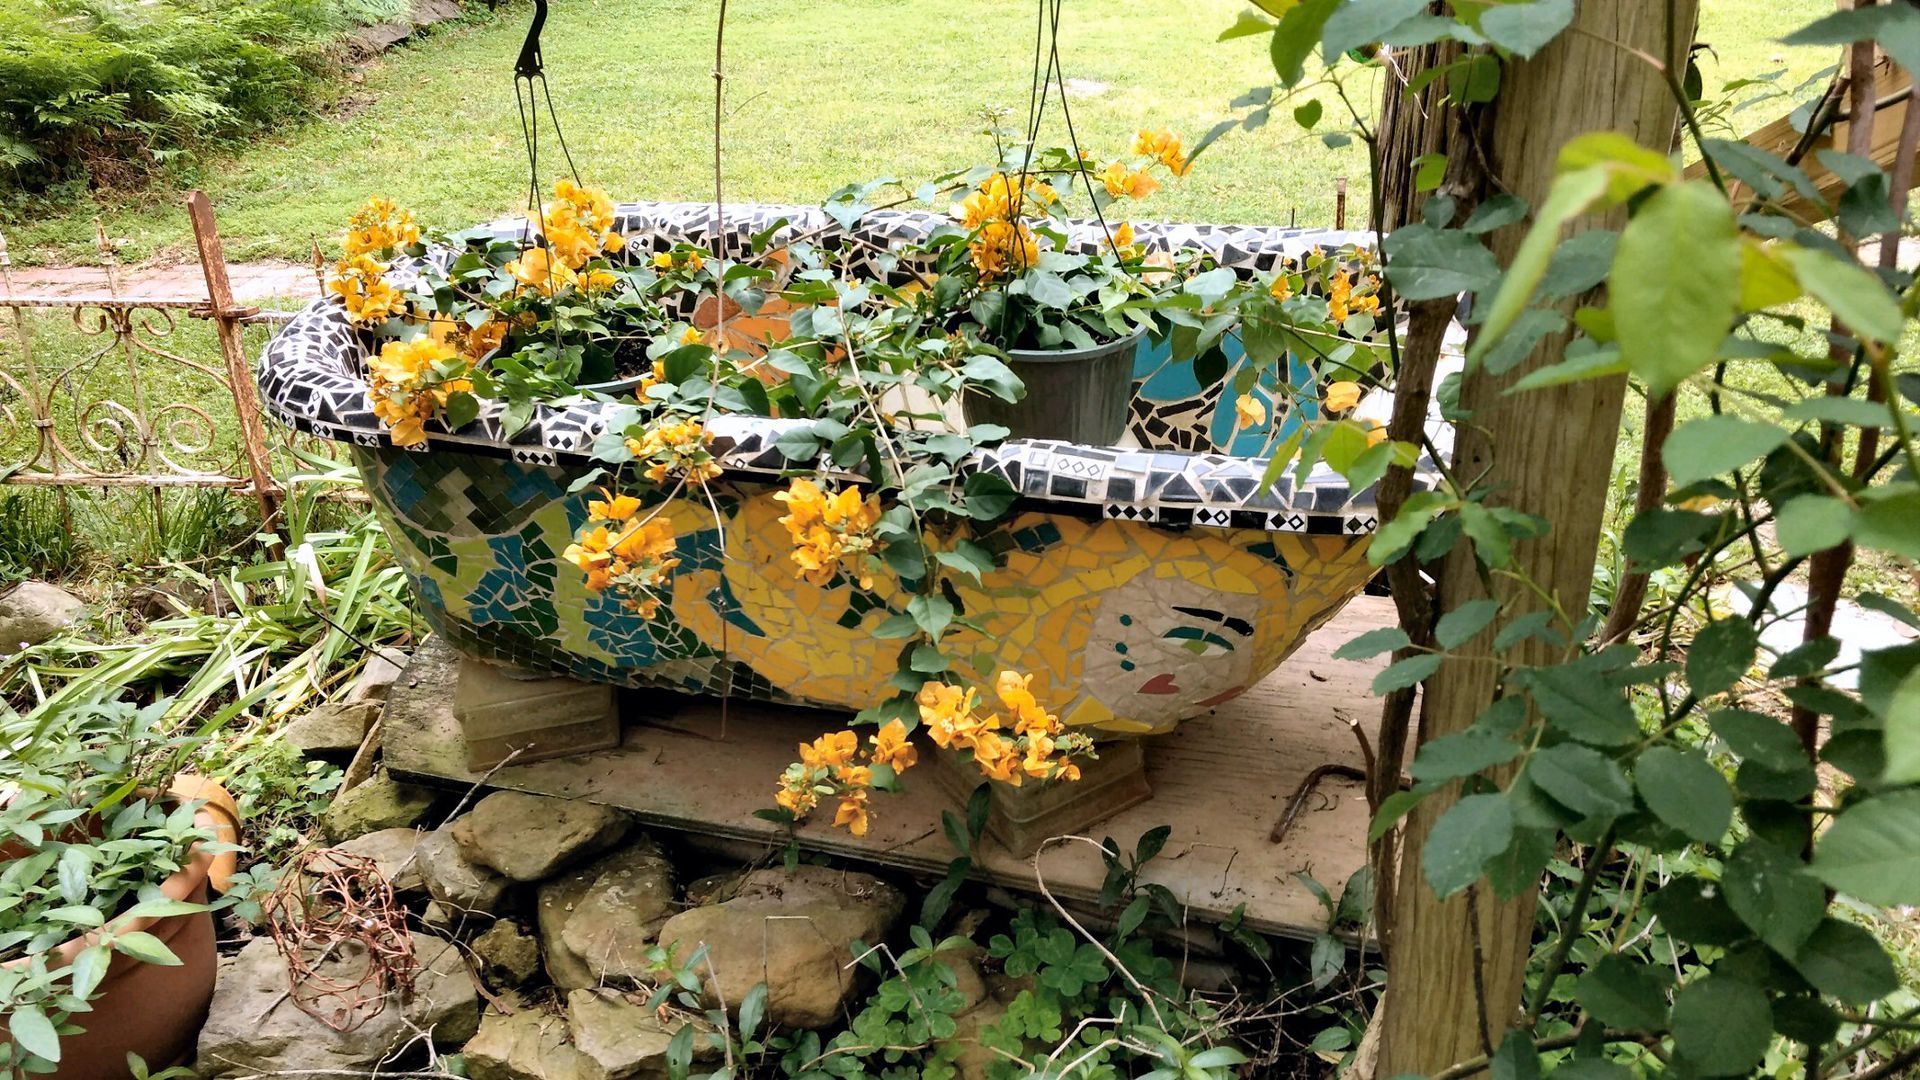 A bathtub filled with yellow flowers in a garden